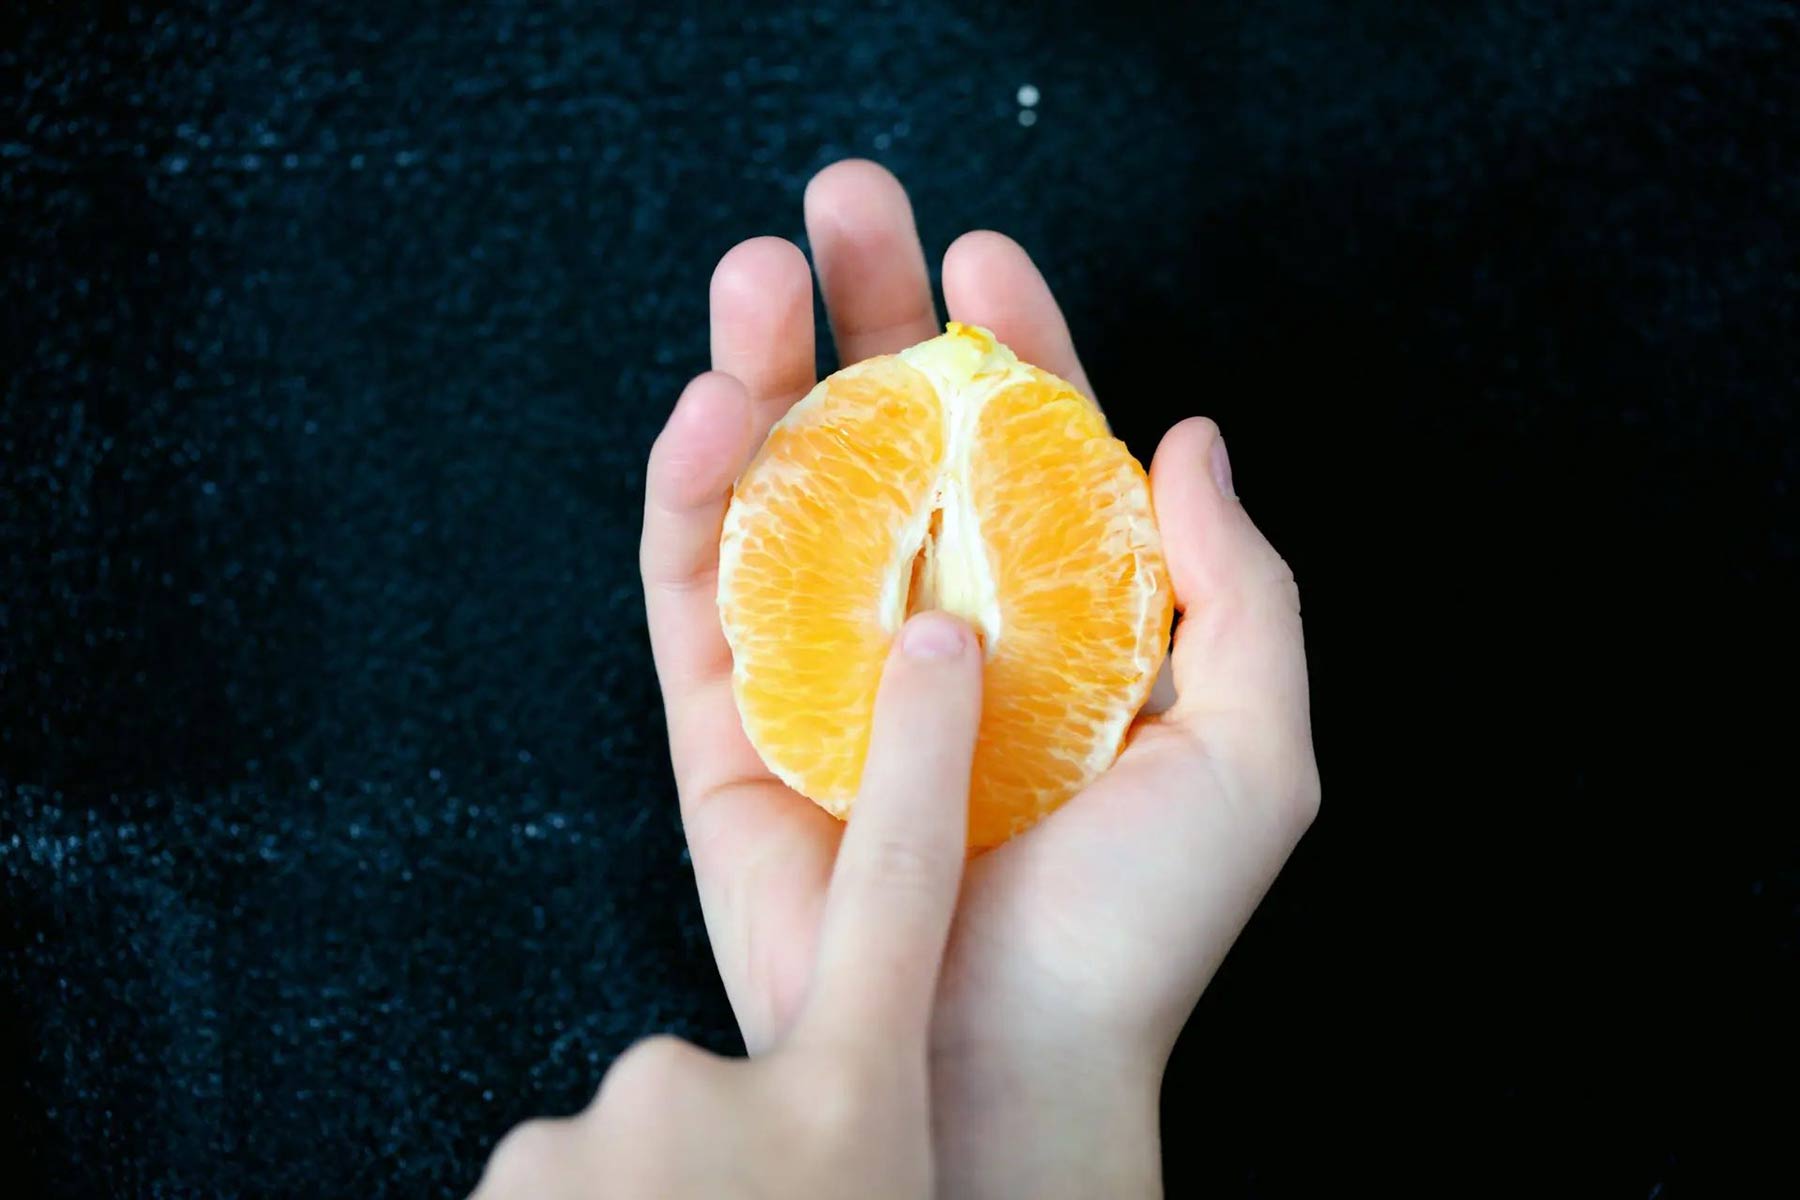 a woman's hands holding half an orange while suggestively touching the center